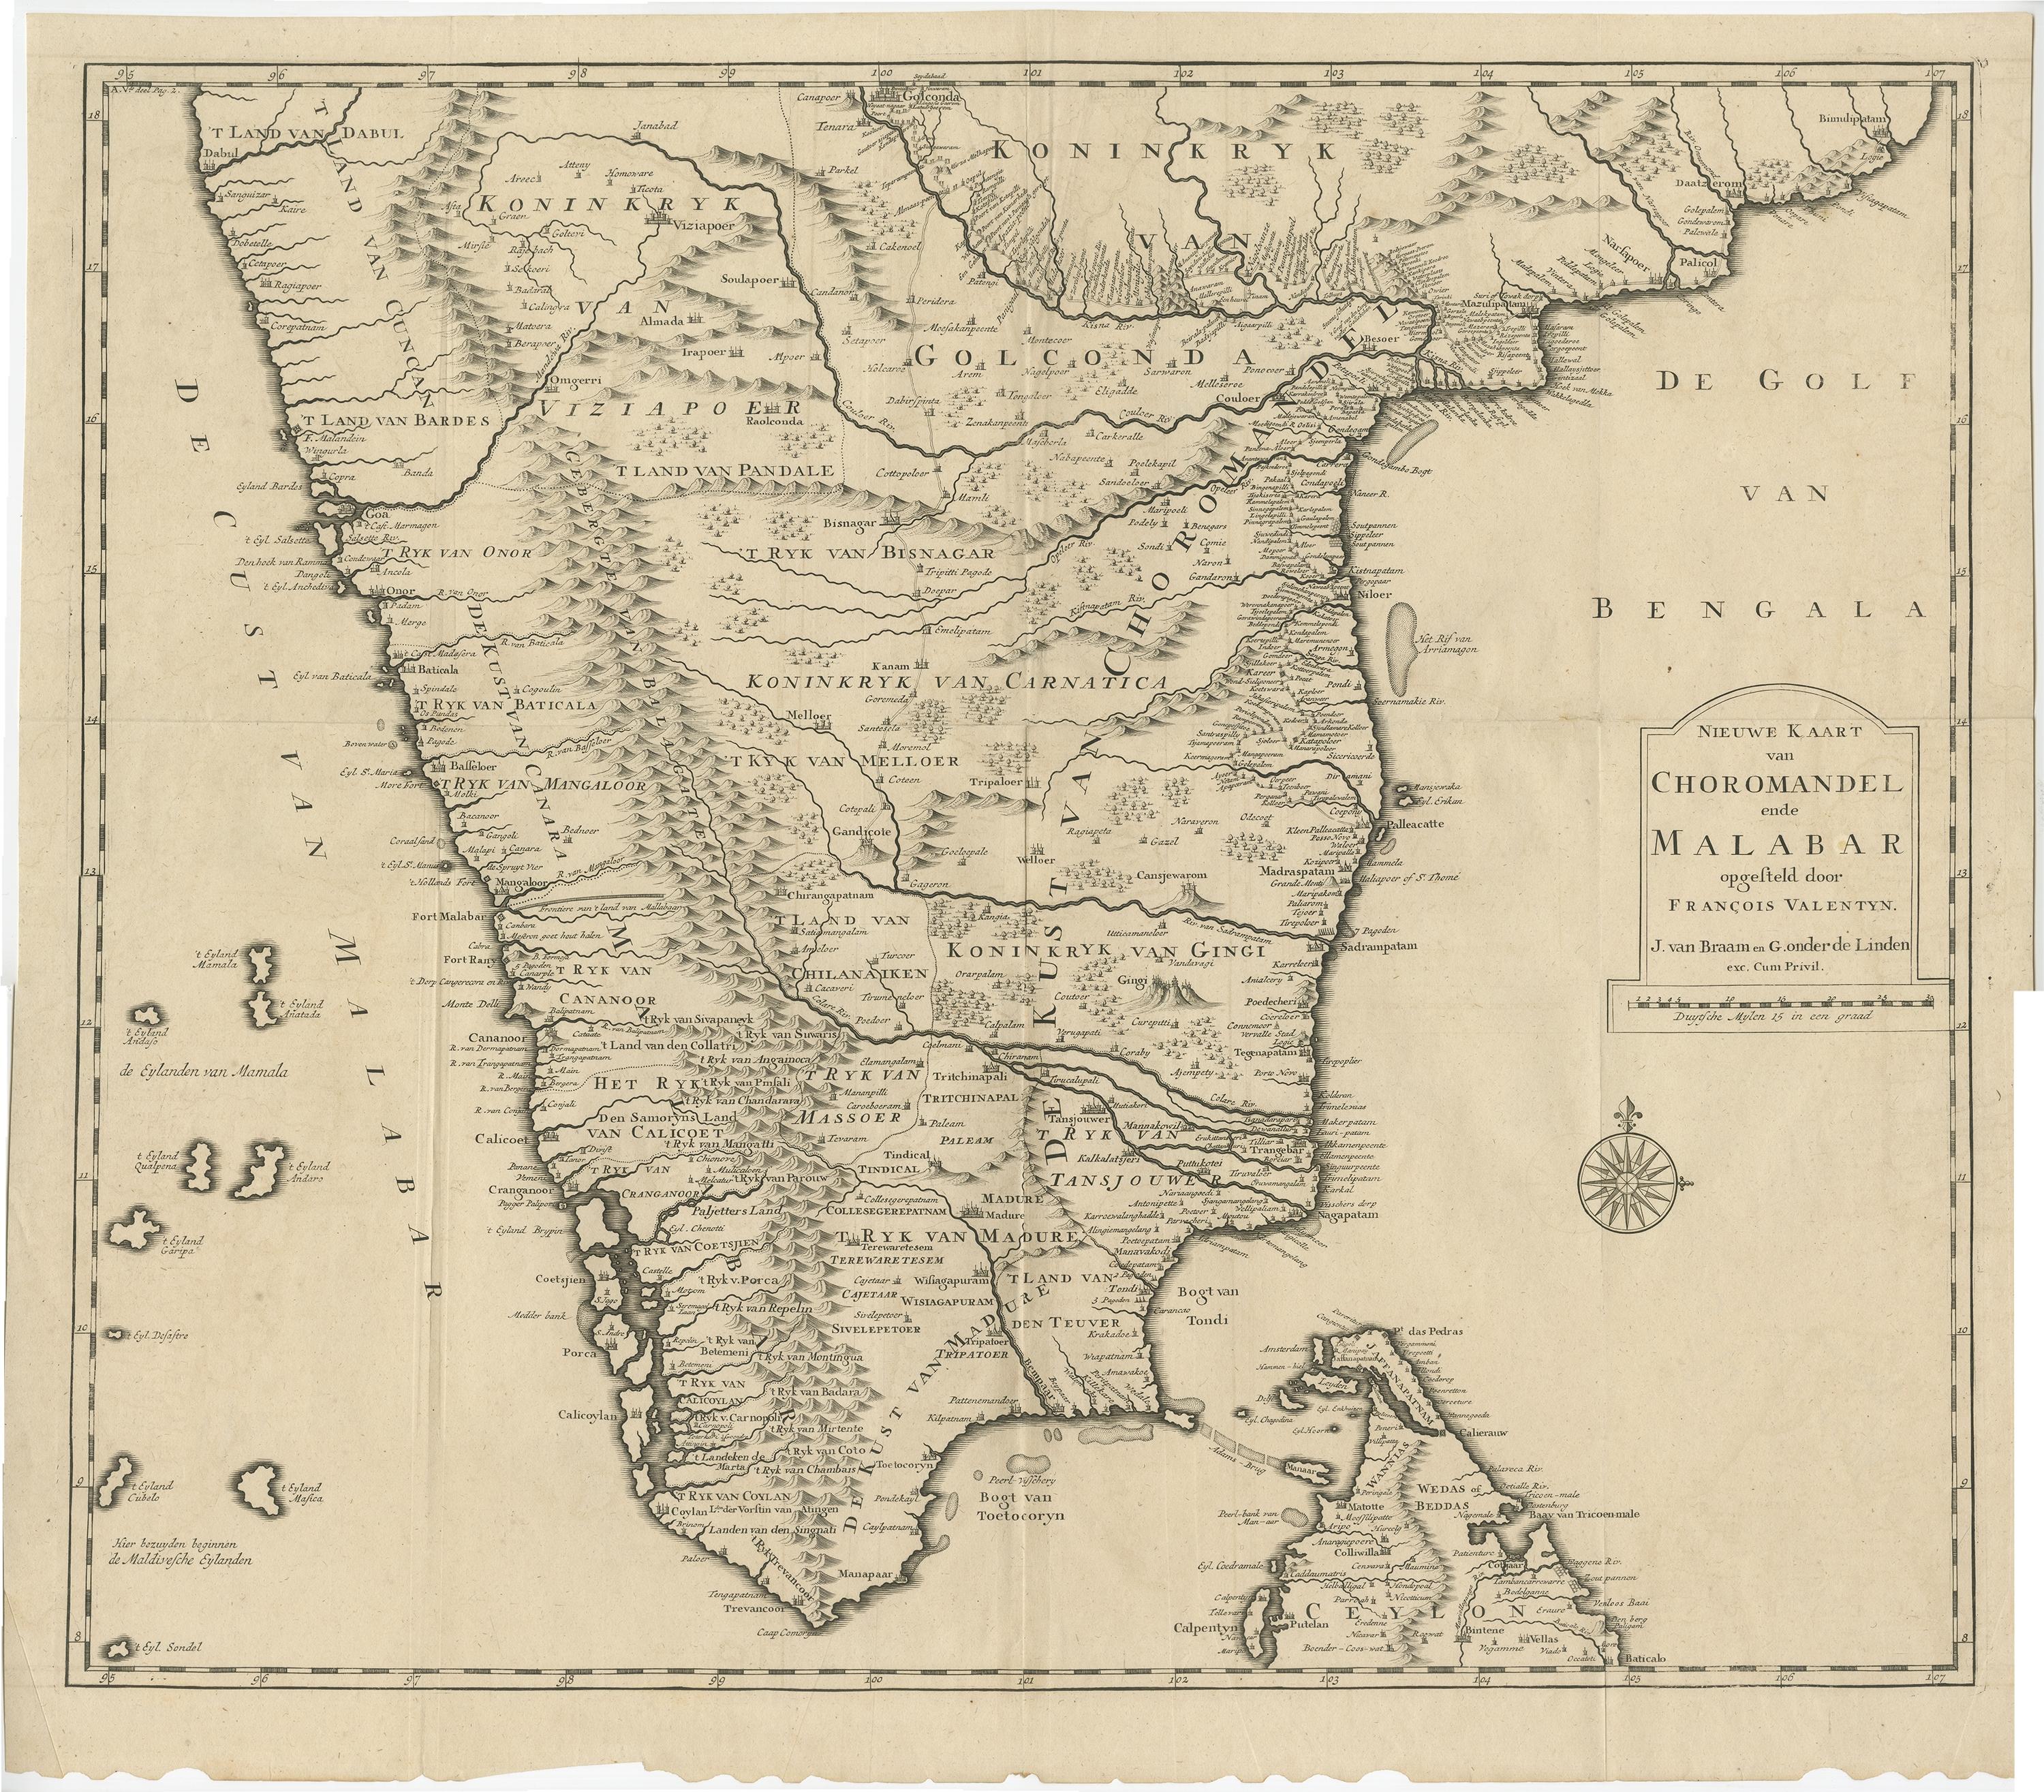 Antique map titled 'Nieuwe kaart van Choromandel ende Malabar.' 

Original antique map of Southern India documenting the VOC's areas of influence. Included is Kerala, Tamil Nadu and the northern edge of Sri Lanka. This map originates from 'Oud en